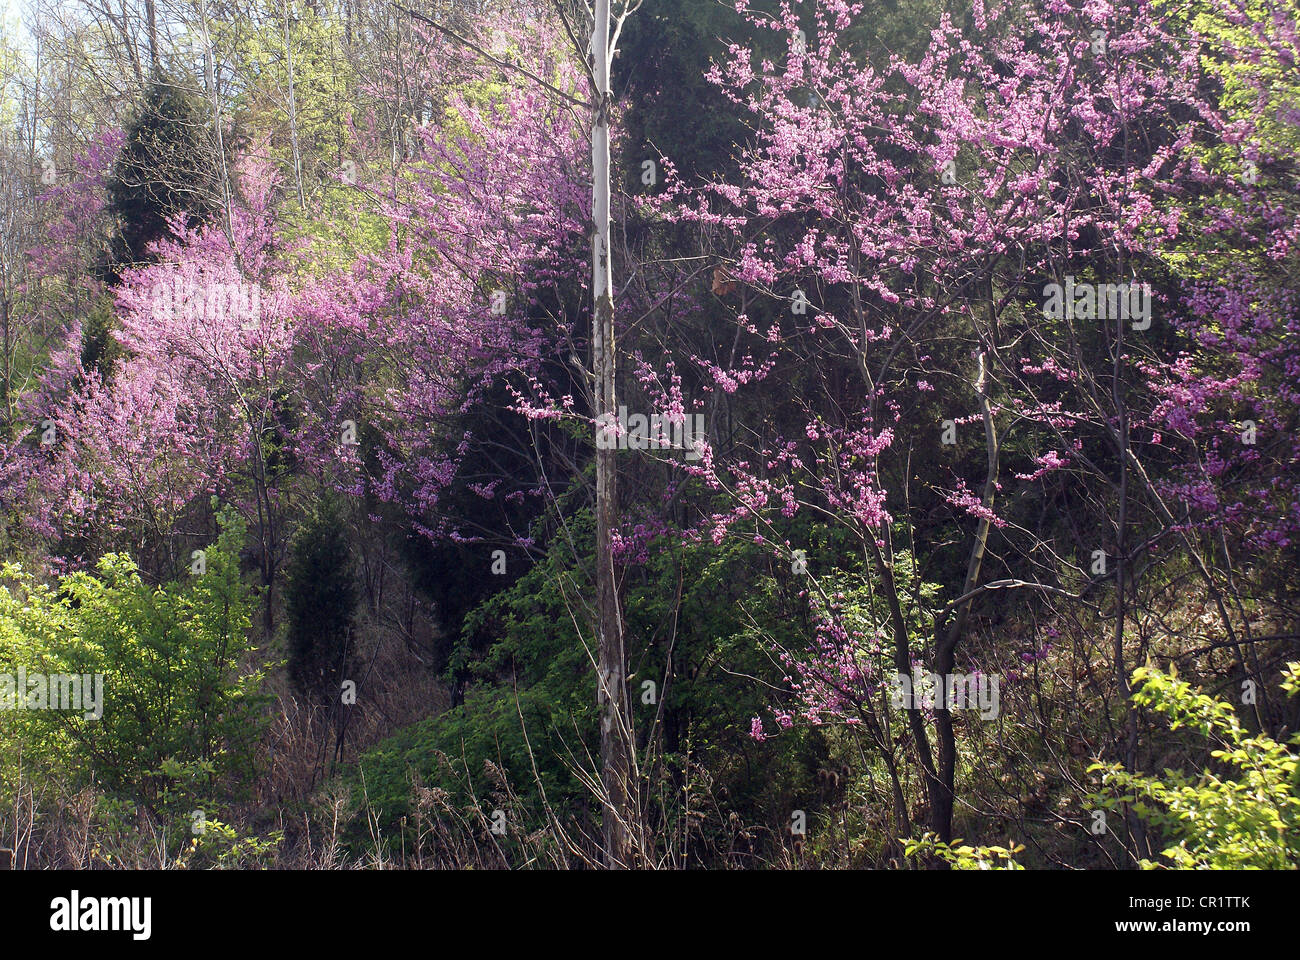 Redbud trees and new green growth make springtime full of vibrant color. Stock Photo